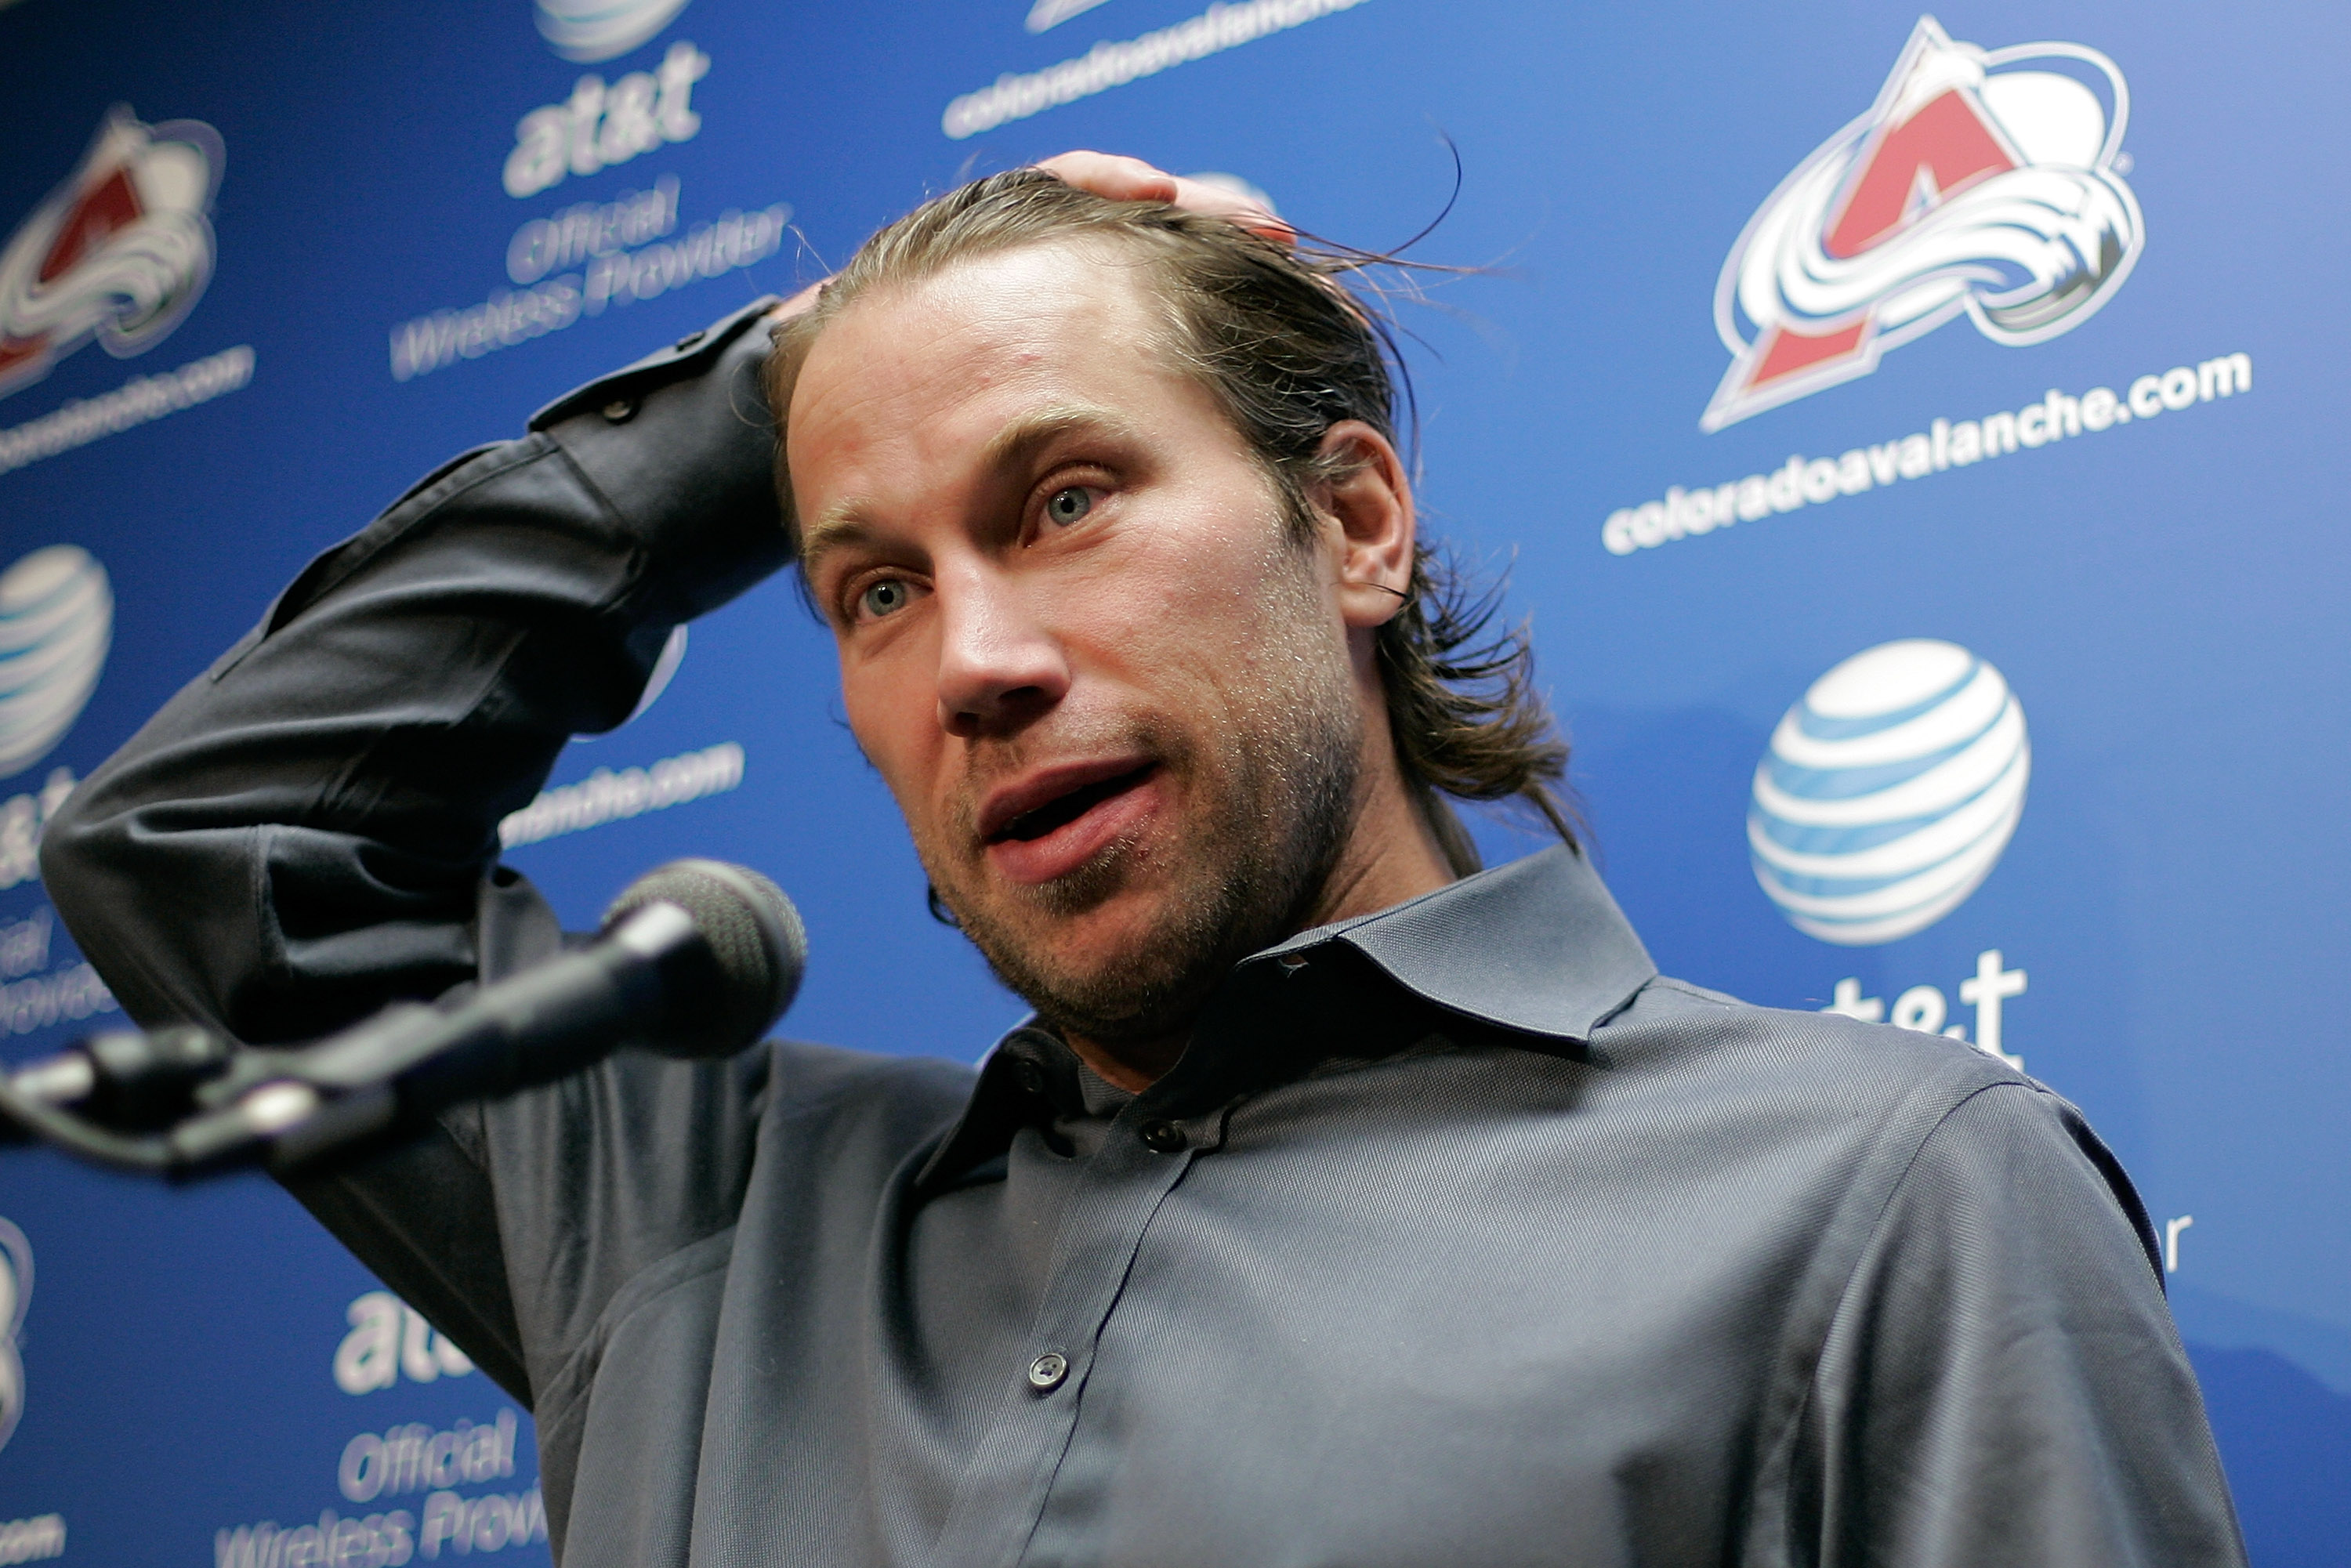 DENVER, CO - JANUARY 22:  Peter Forsberg addresses the media following a practice session with the Colorado Avalanche at Pepsi Center on January 22, 2011 in Denver, Colorado. The 37 year old star center ran drills with forward Ryan O'Reilly for approximat